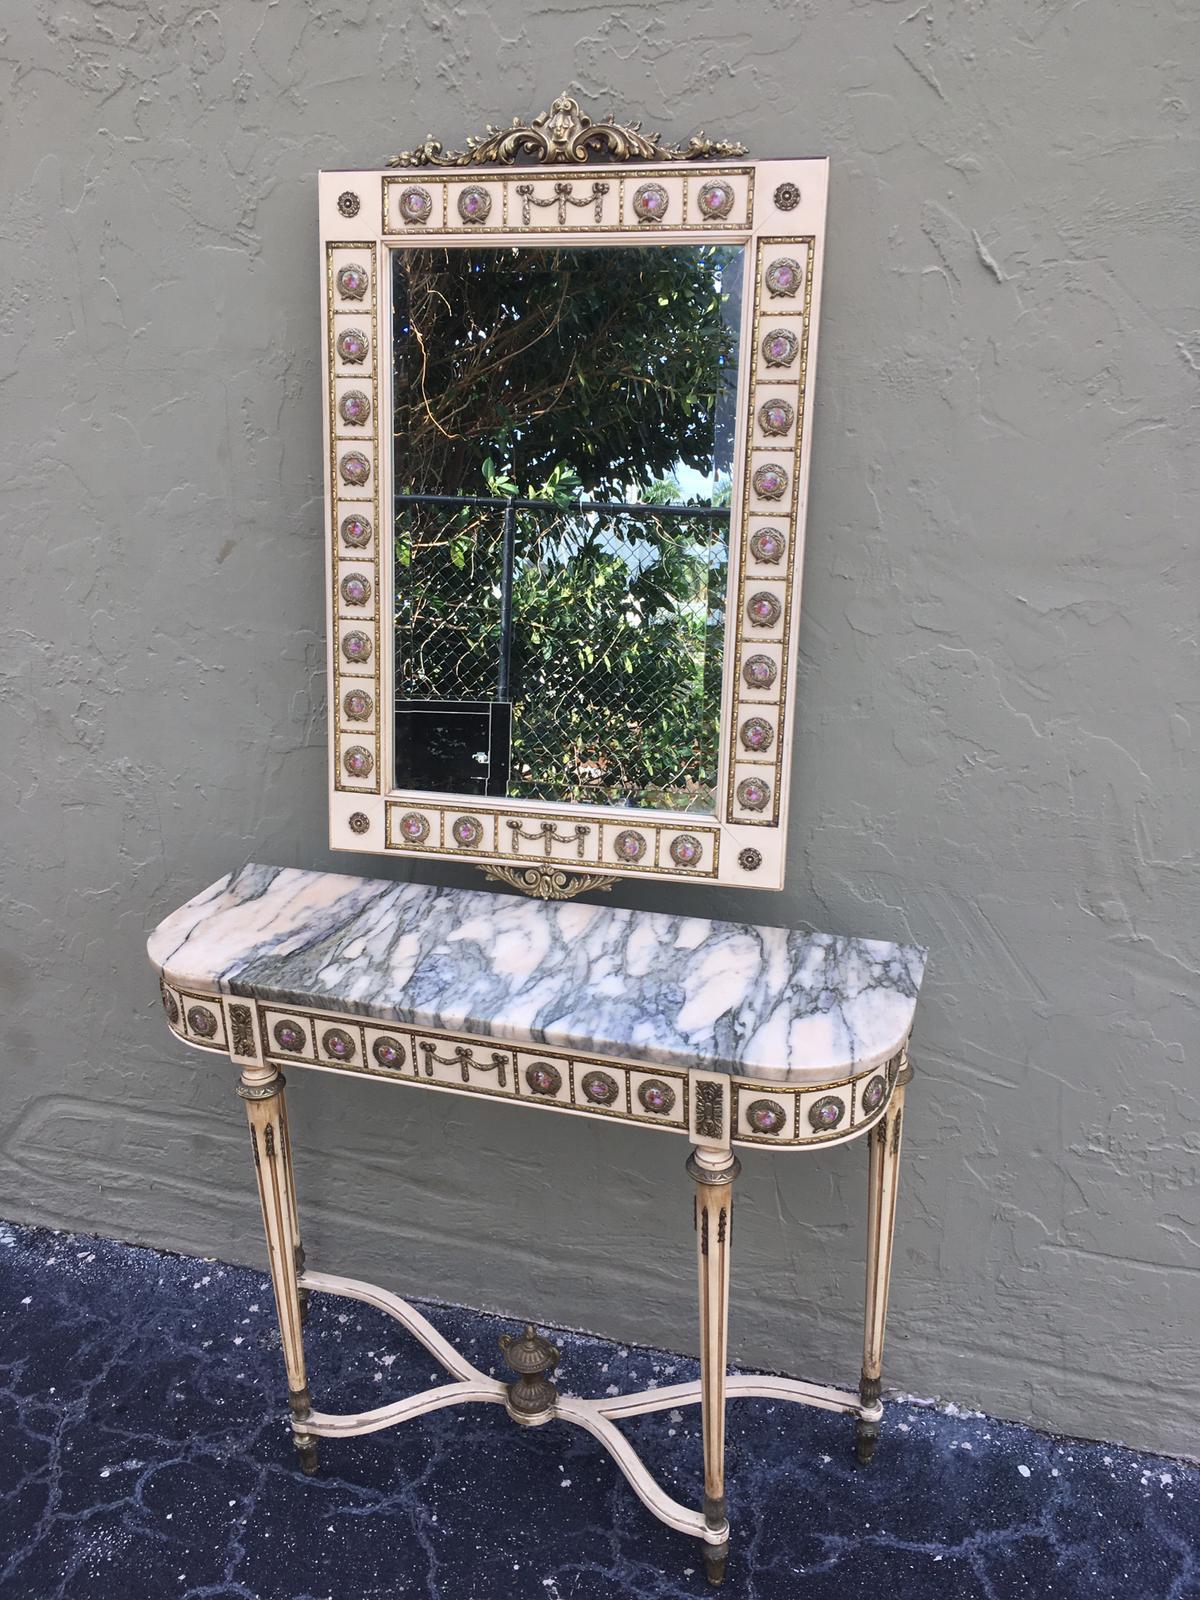 20th century Louis Philippe style wood and ceramic console table and matching mirror.

